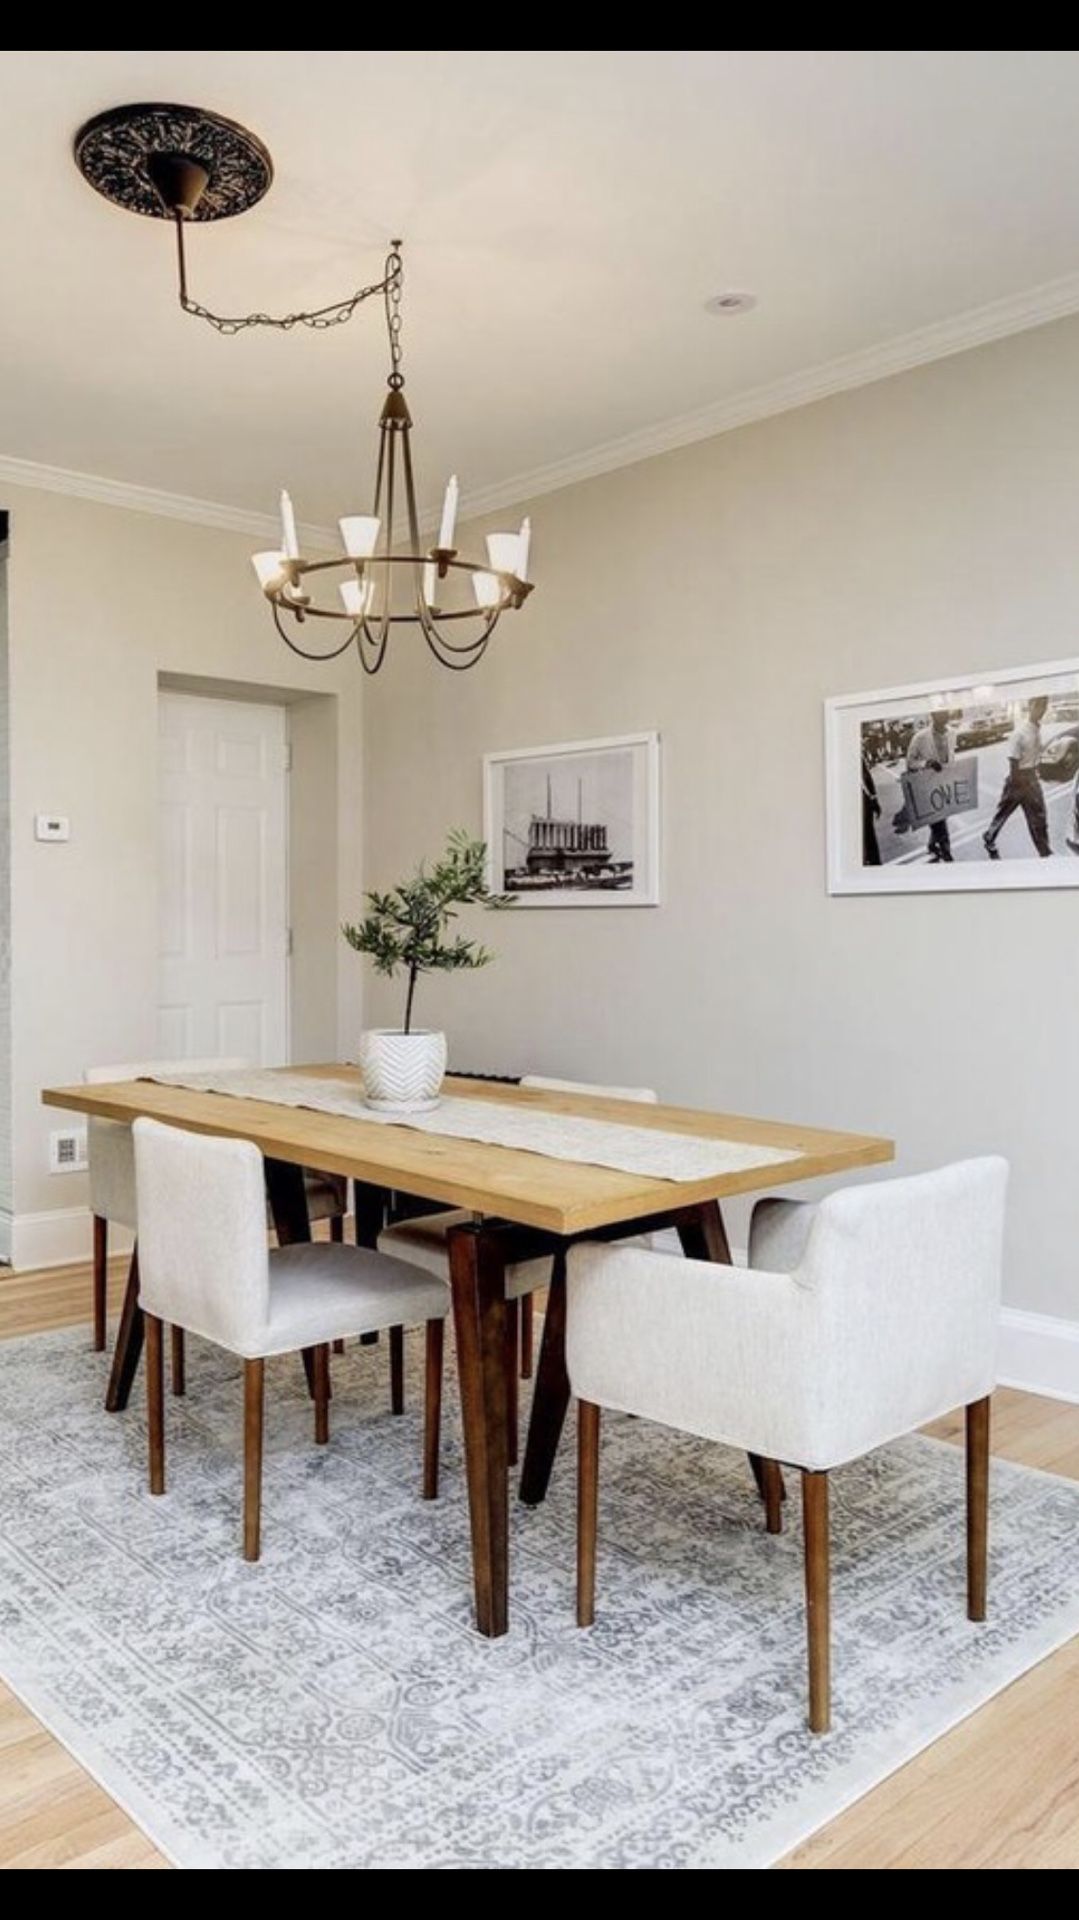 WEST ELM Dining Room Table